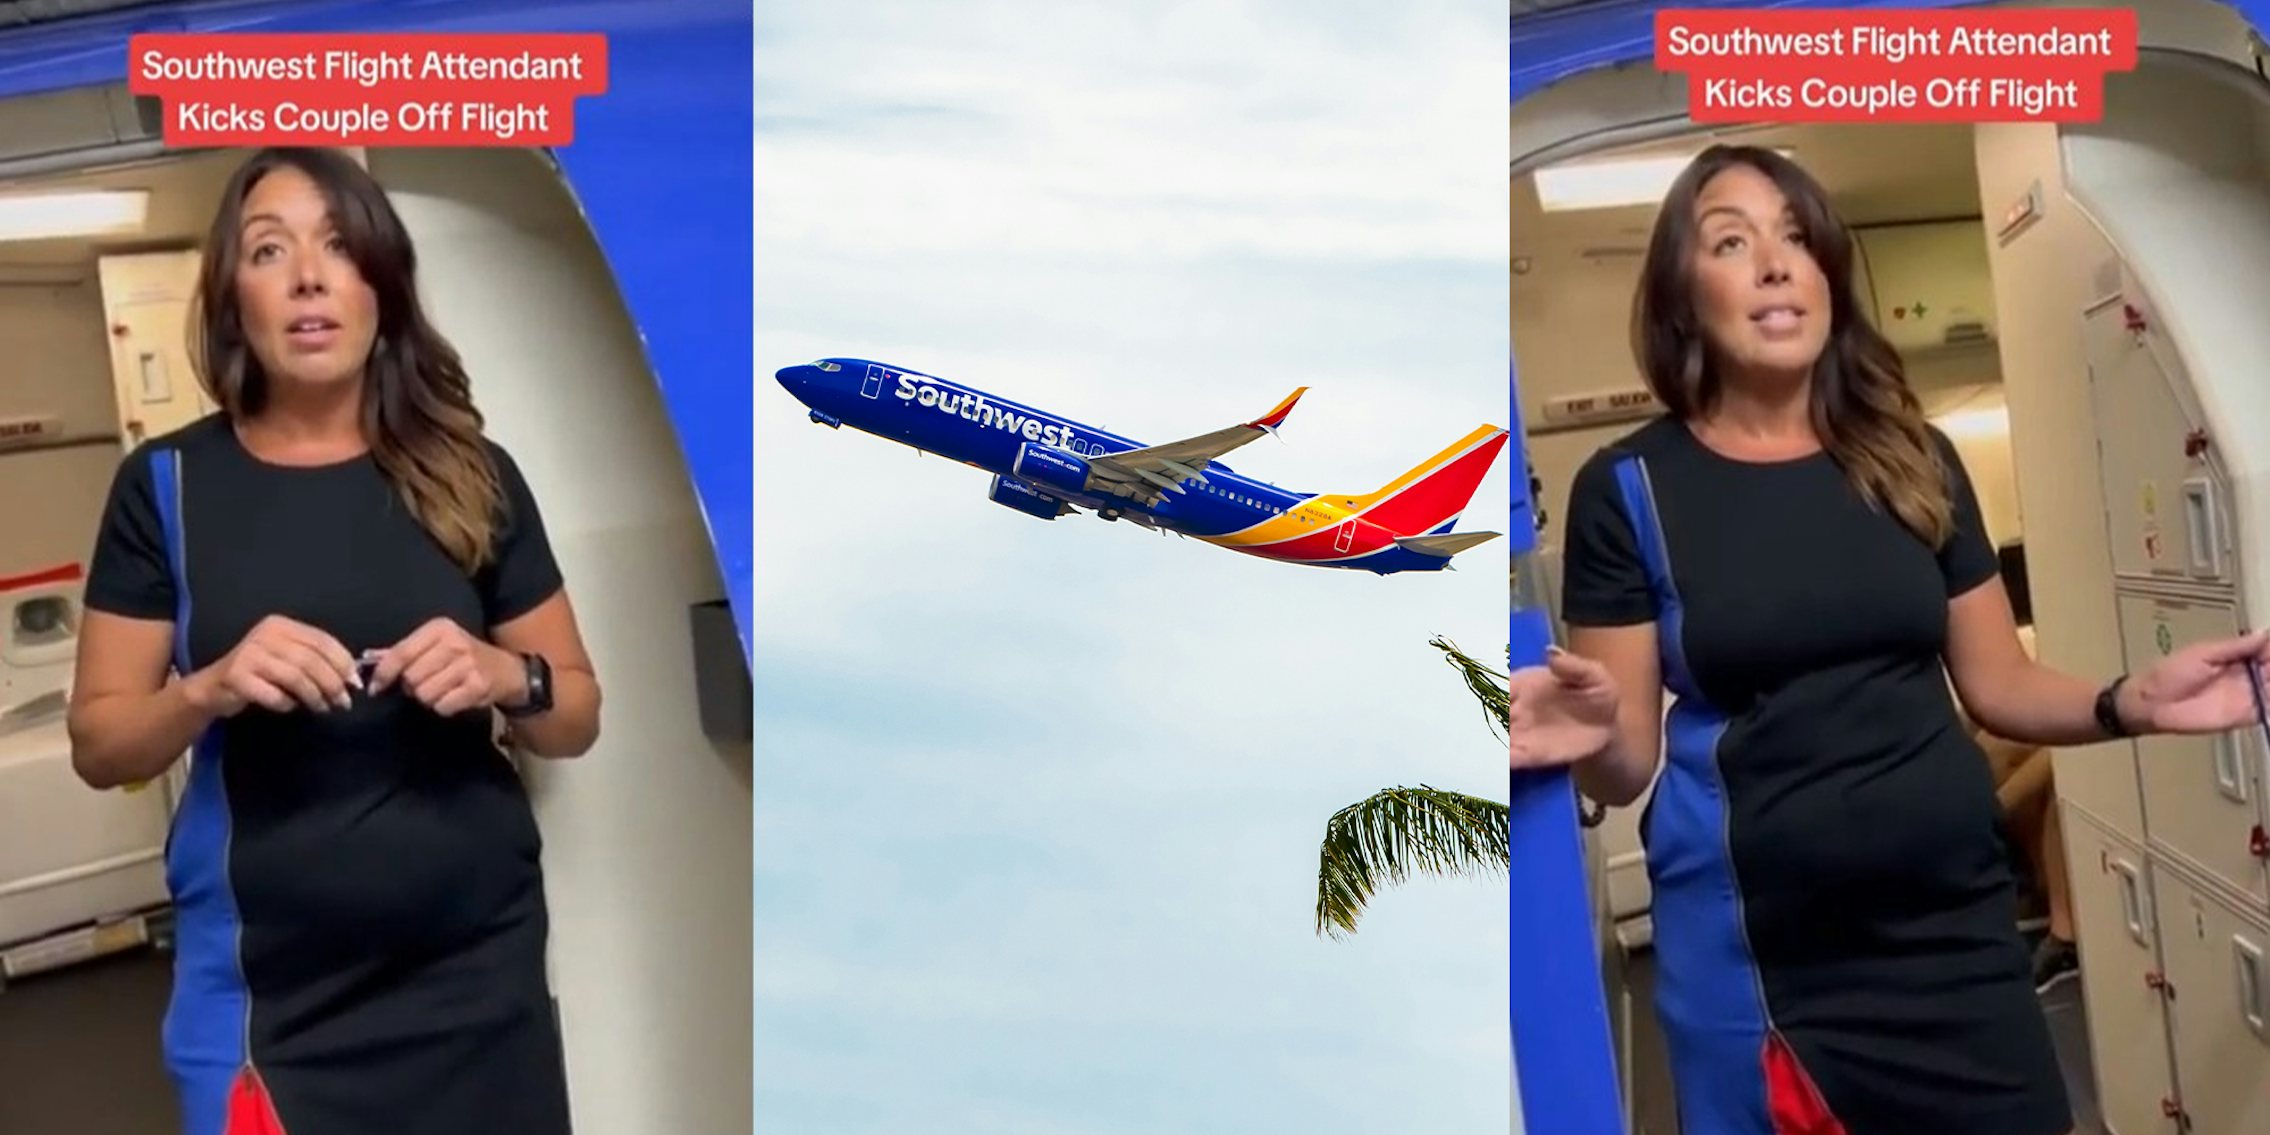 Southwest Airlines flight attendant kicks off couple from airplane